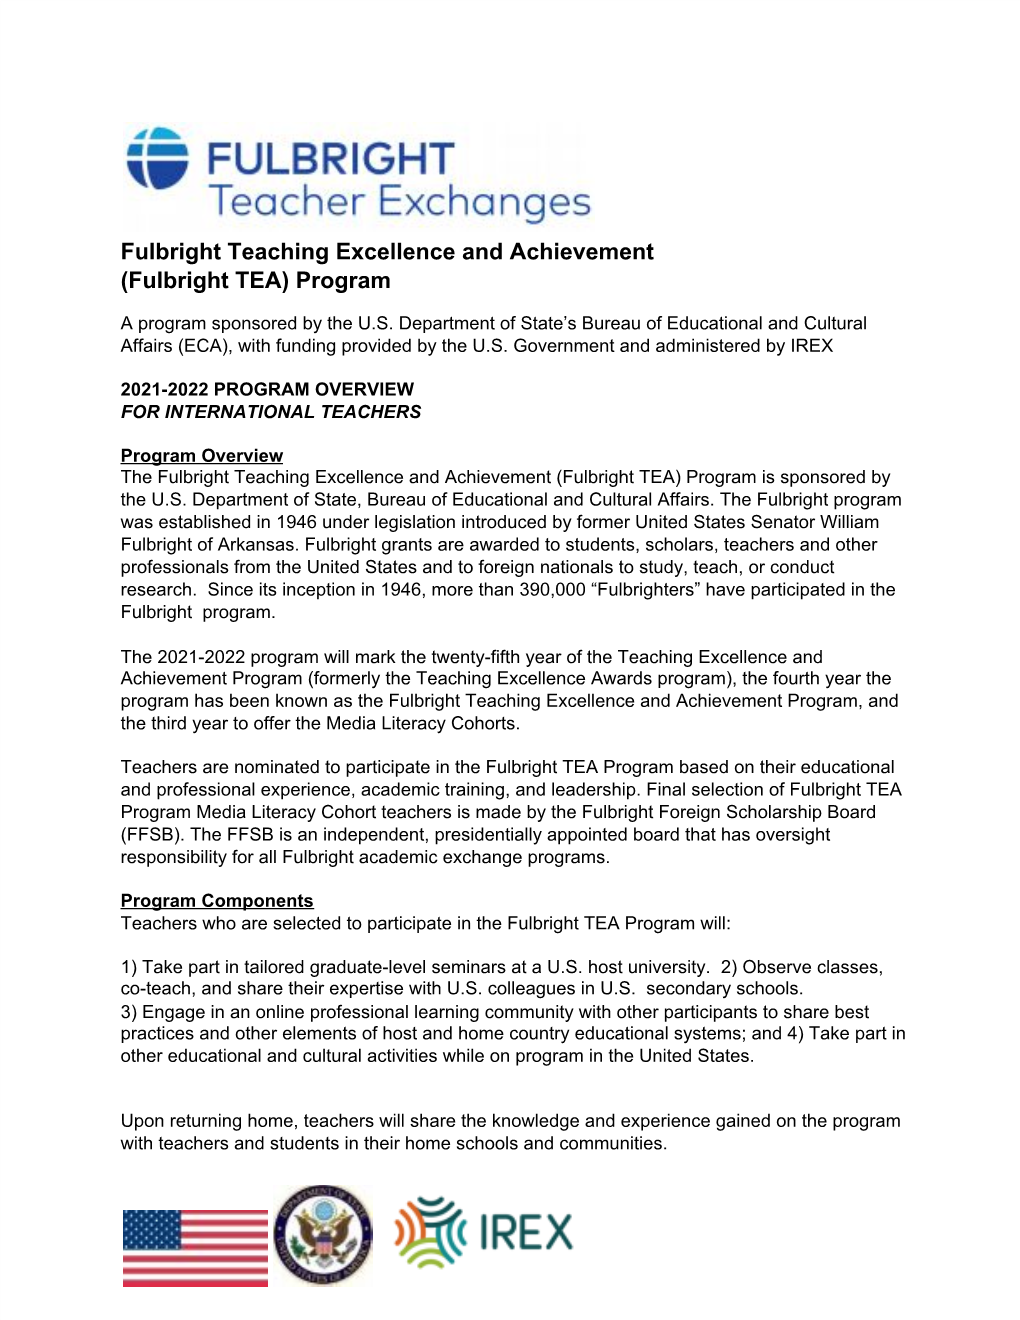 Fulbright Teaching Excellence and Achievement (Fulbright TEA) Program